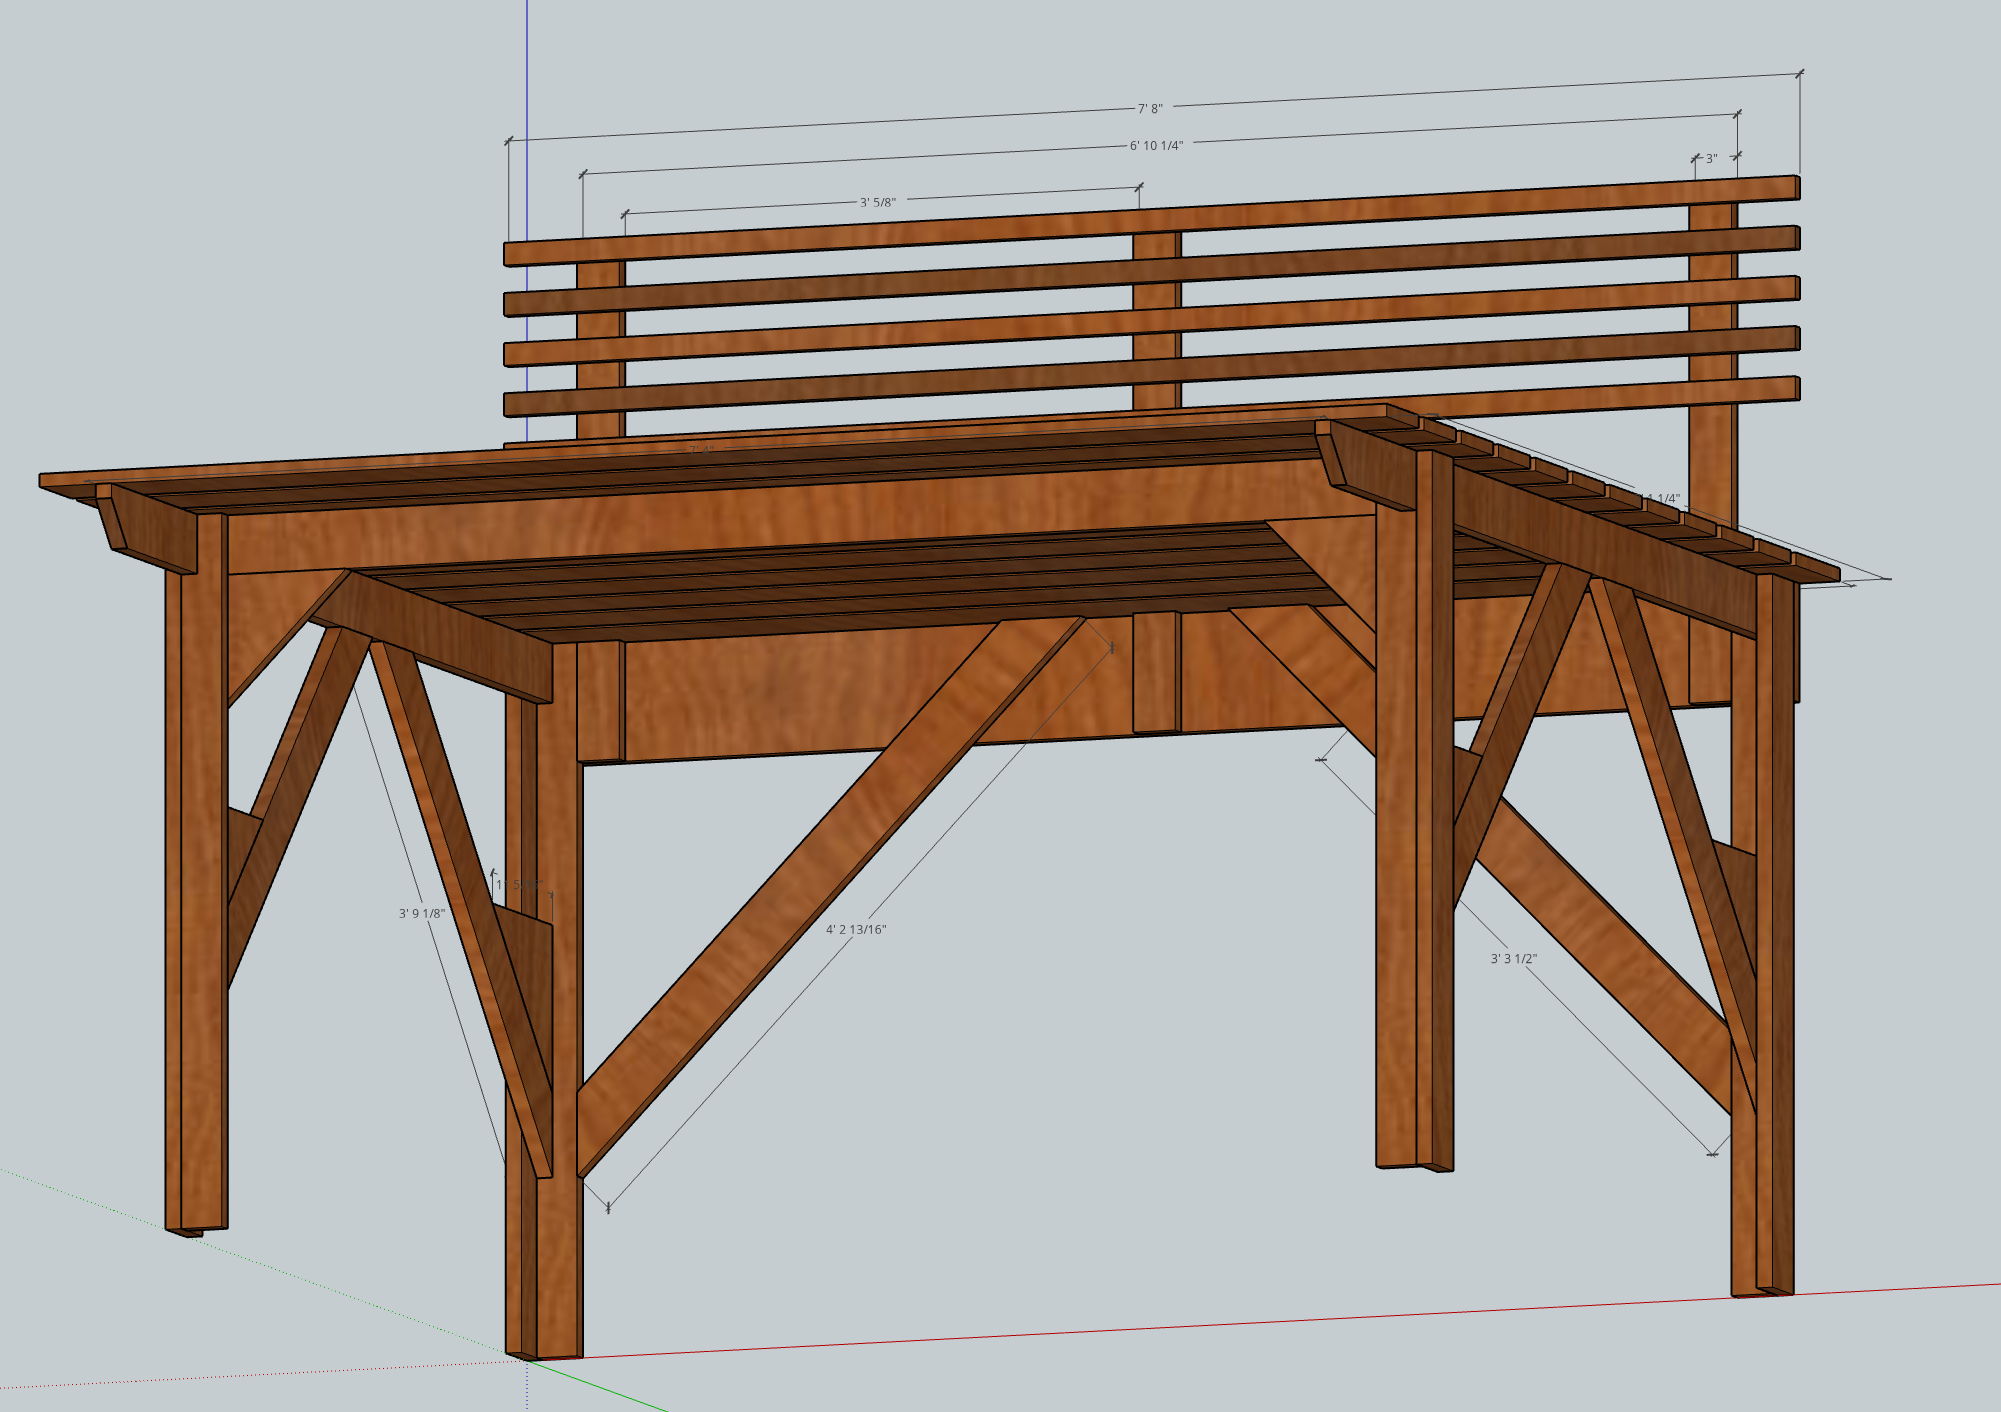 My second draft design, which is bascially what I built other than I added two center support beams.